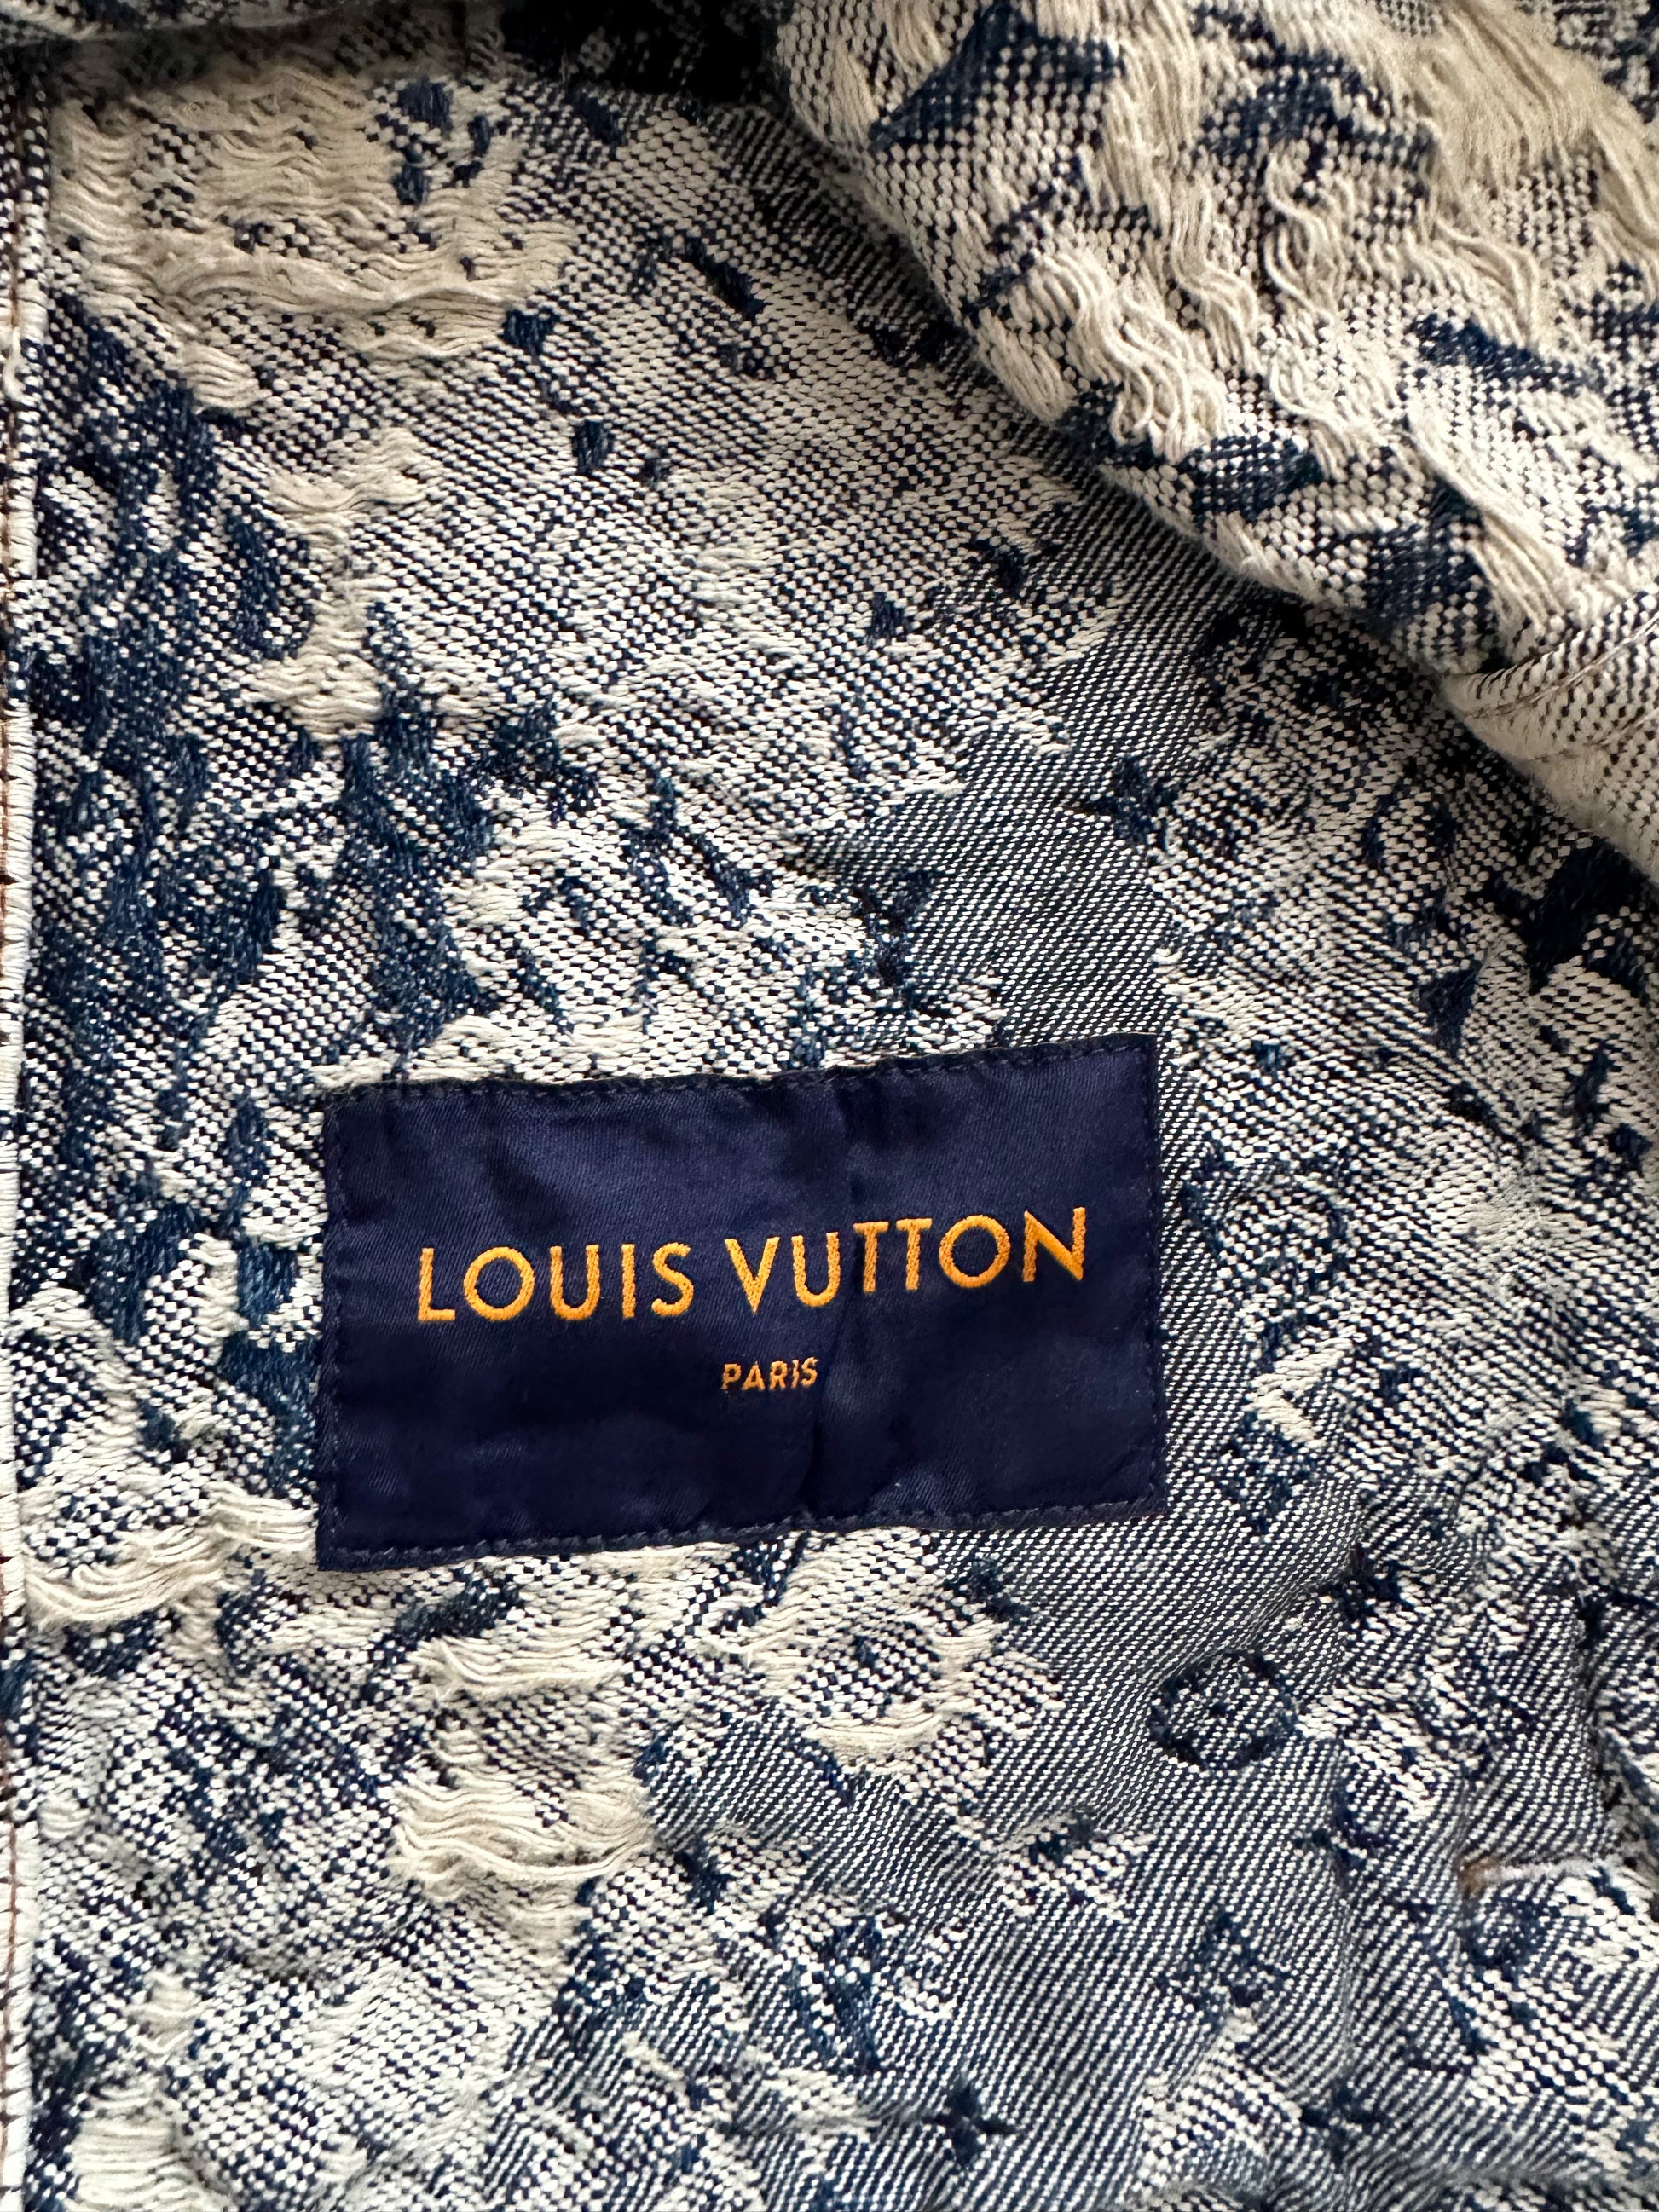 Louis Vuitton 2022 Floral Tapestry Denim Jacket w/ Tags - Blue Outerwear,  Clothing - LOU655662